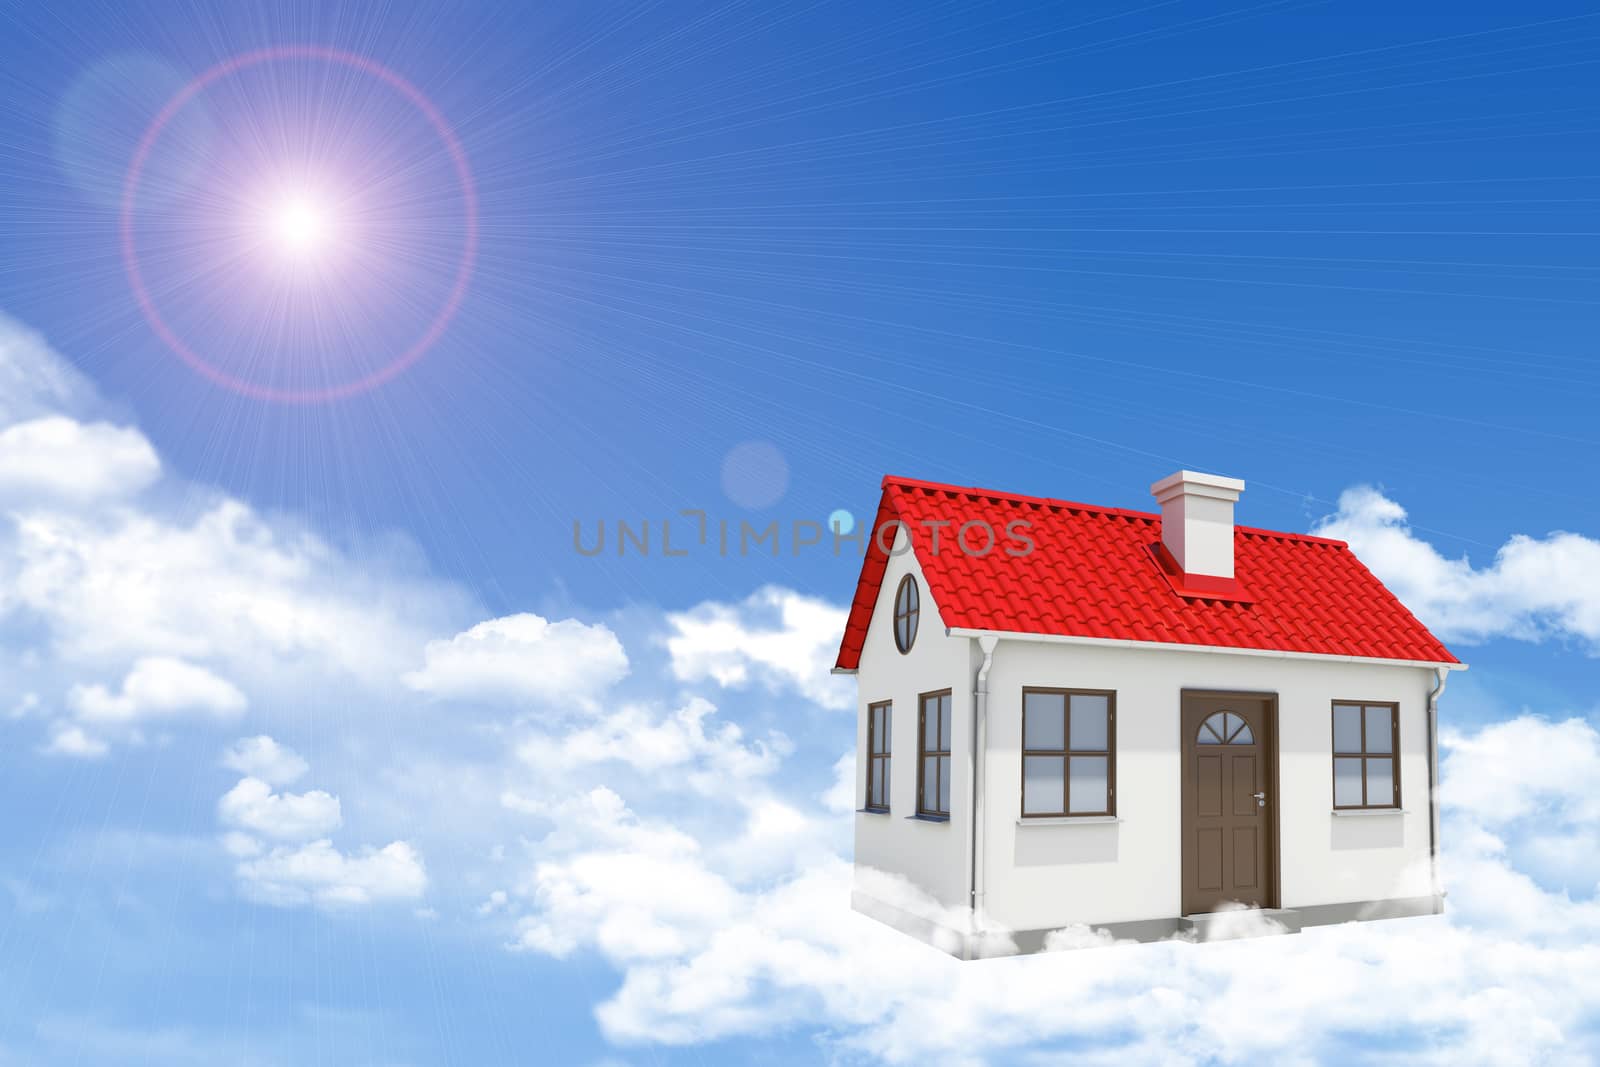 White house with red gable roof, brown door and chimney in clouds. Background sun shines brightly. Blue sky